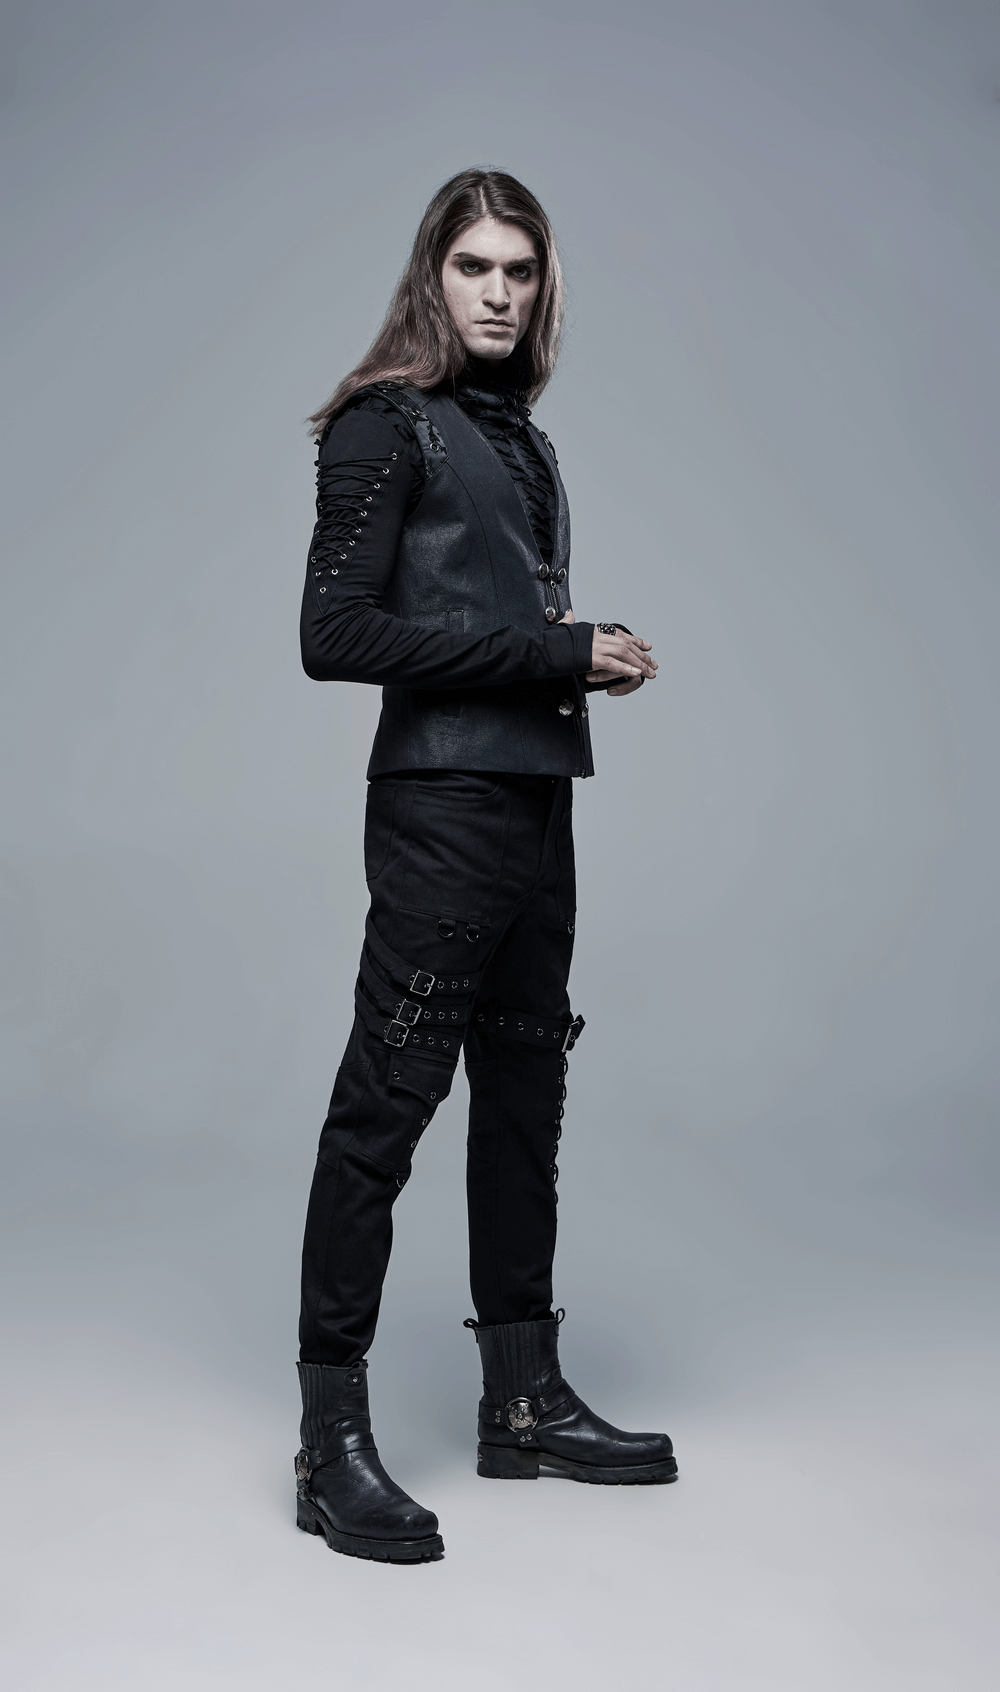 Men's Gothic Cargo Pants with Buckles and Lace-up Detail